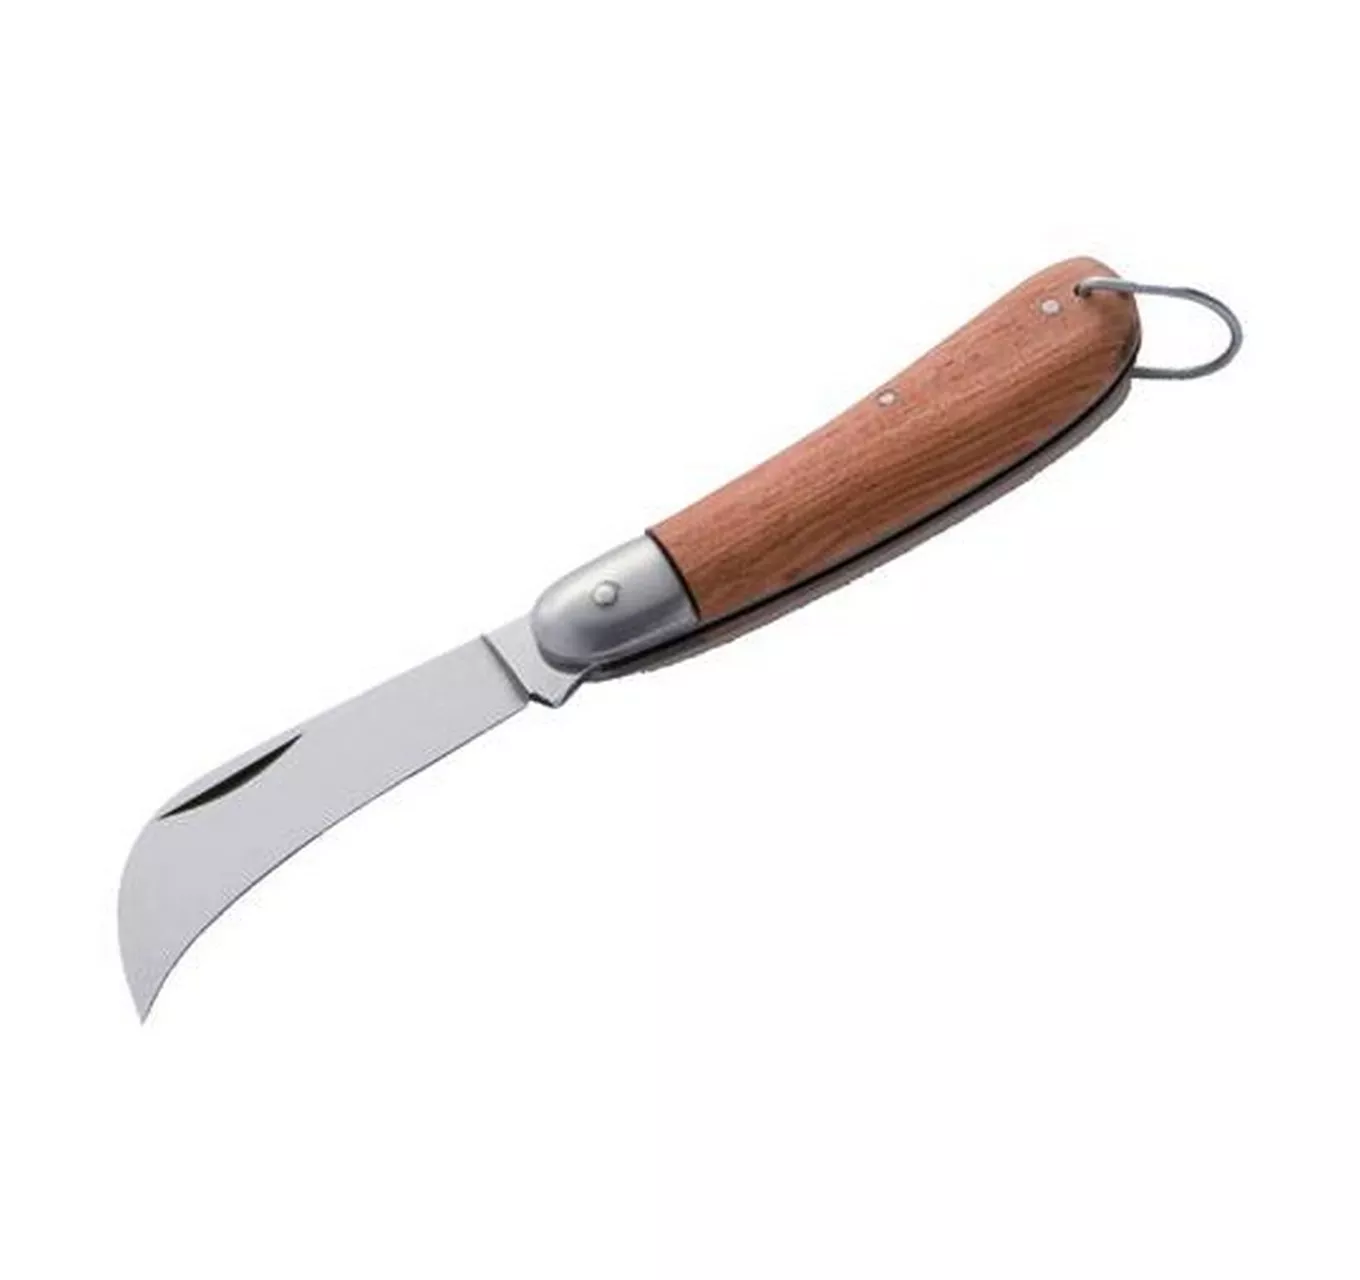 Whitby Pruning Knife 2.36"